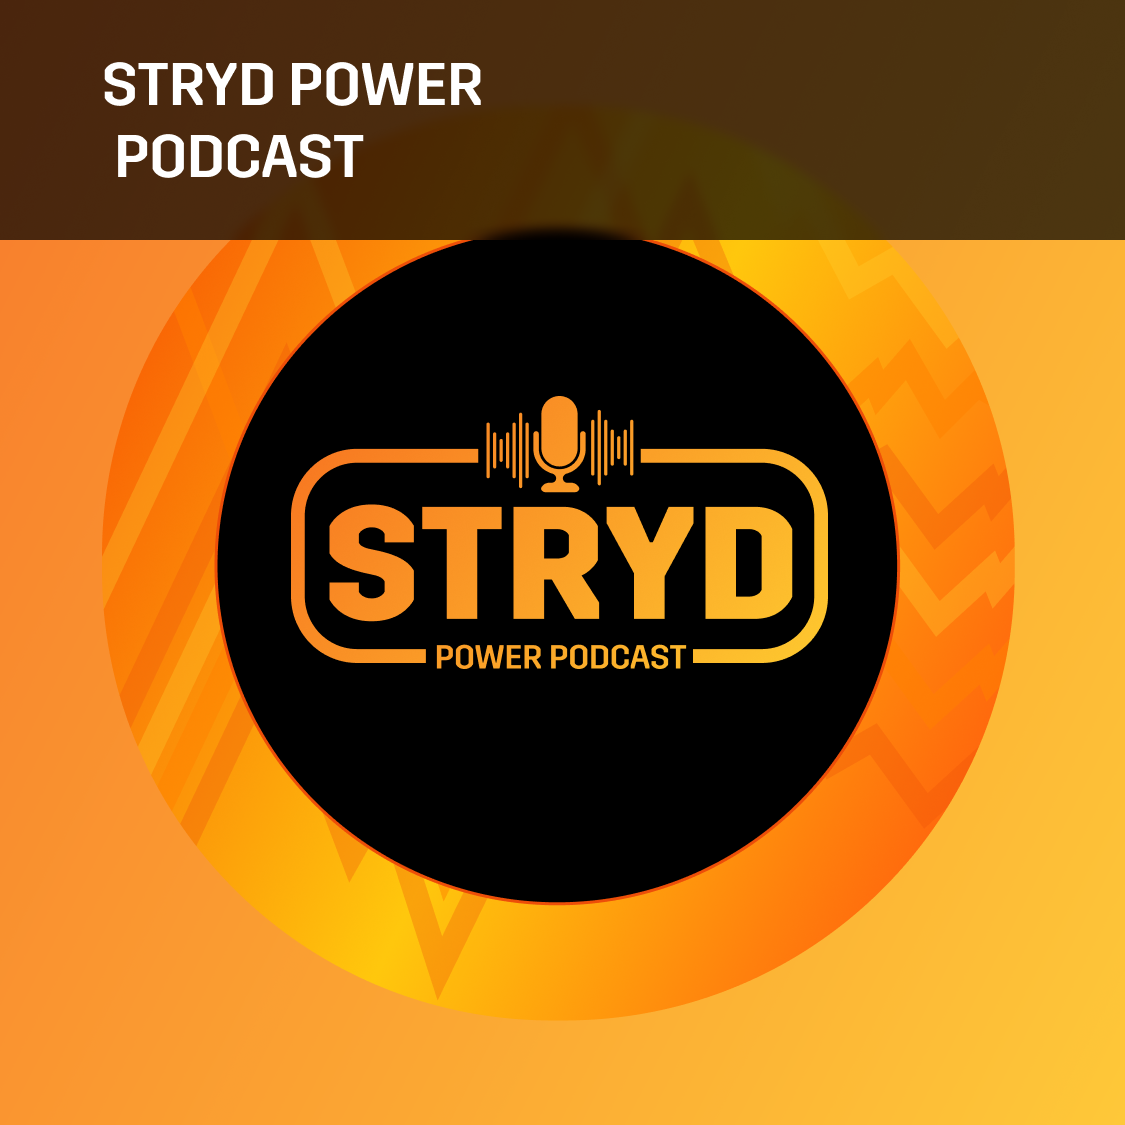 New: Discover workouts, tips, coaching strategies, & more in the Stryd app